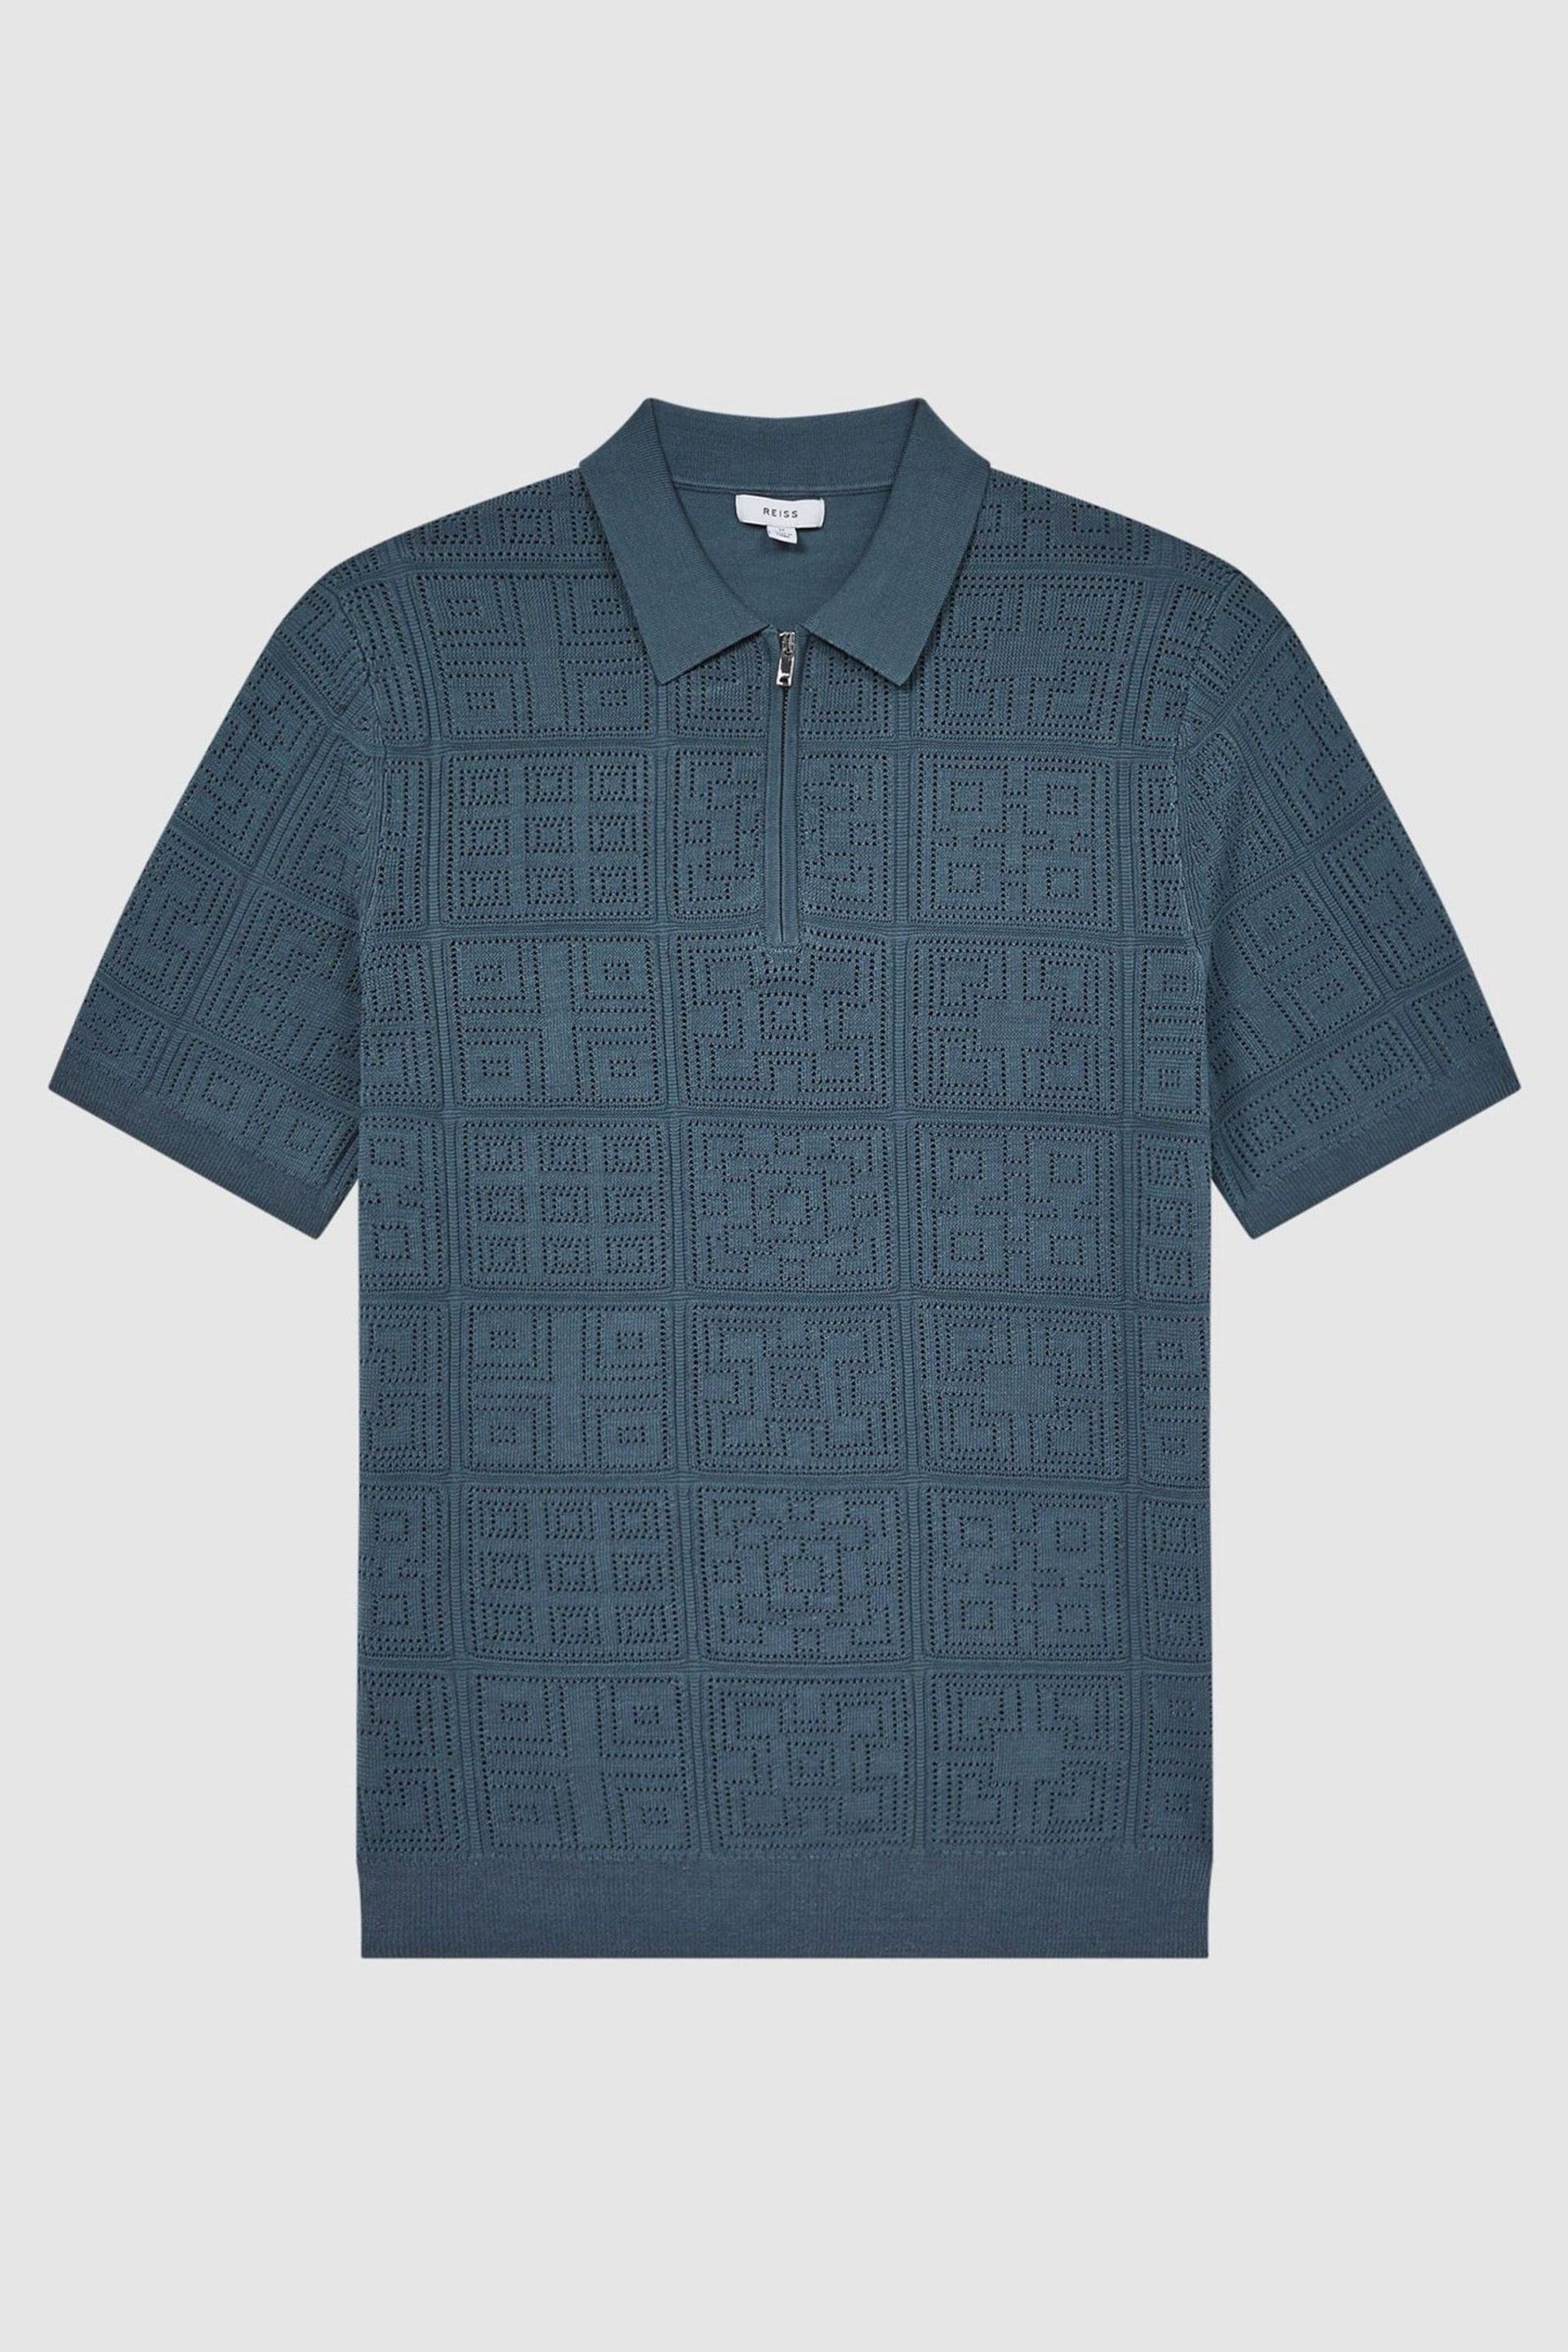 Reiss Airforce Blue Mosaic Half Zip Textured Polo Shirt - Image 2 of 6